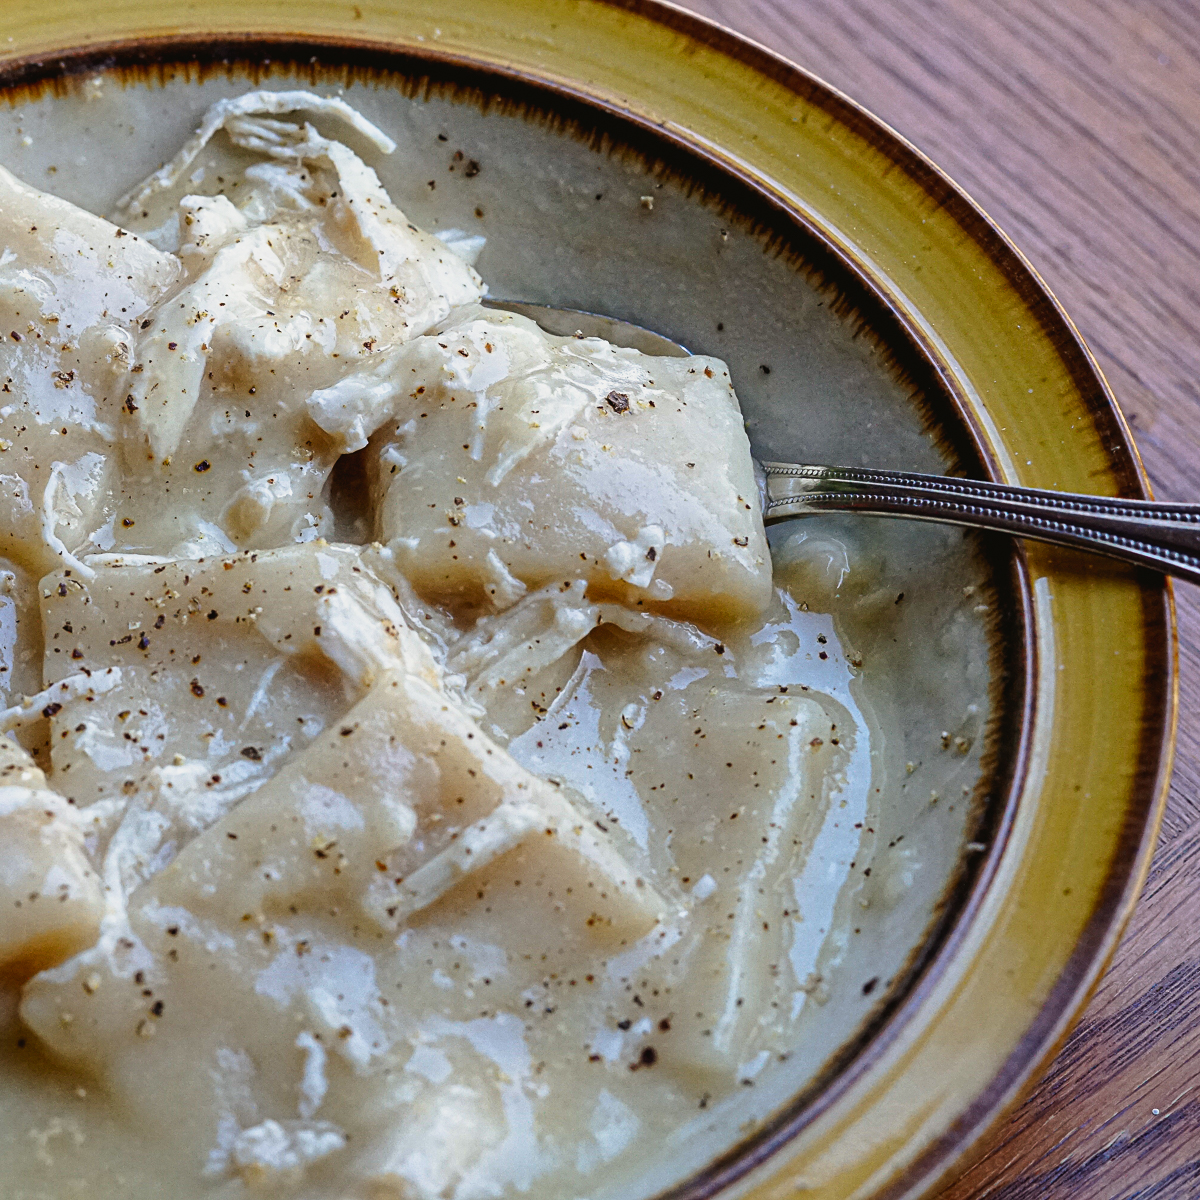 Homemade chicken and dumplings in a bowl with salt and pepper